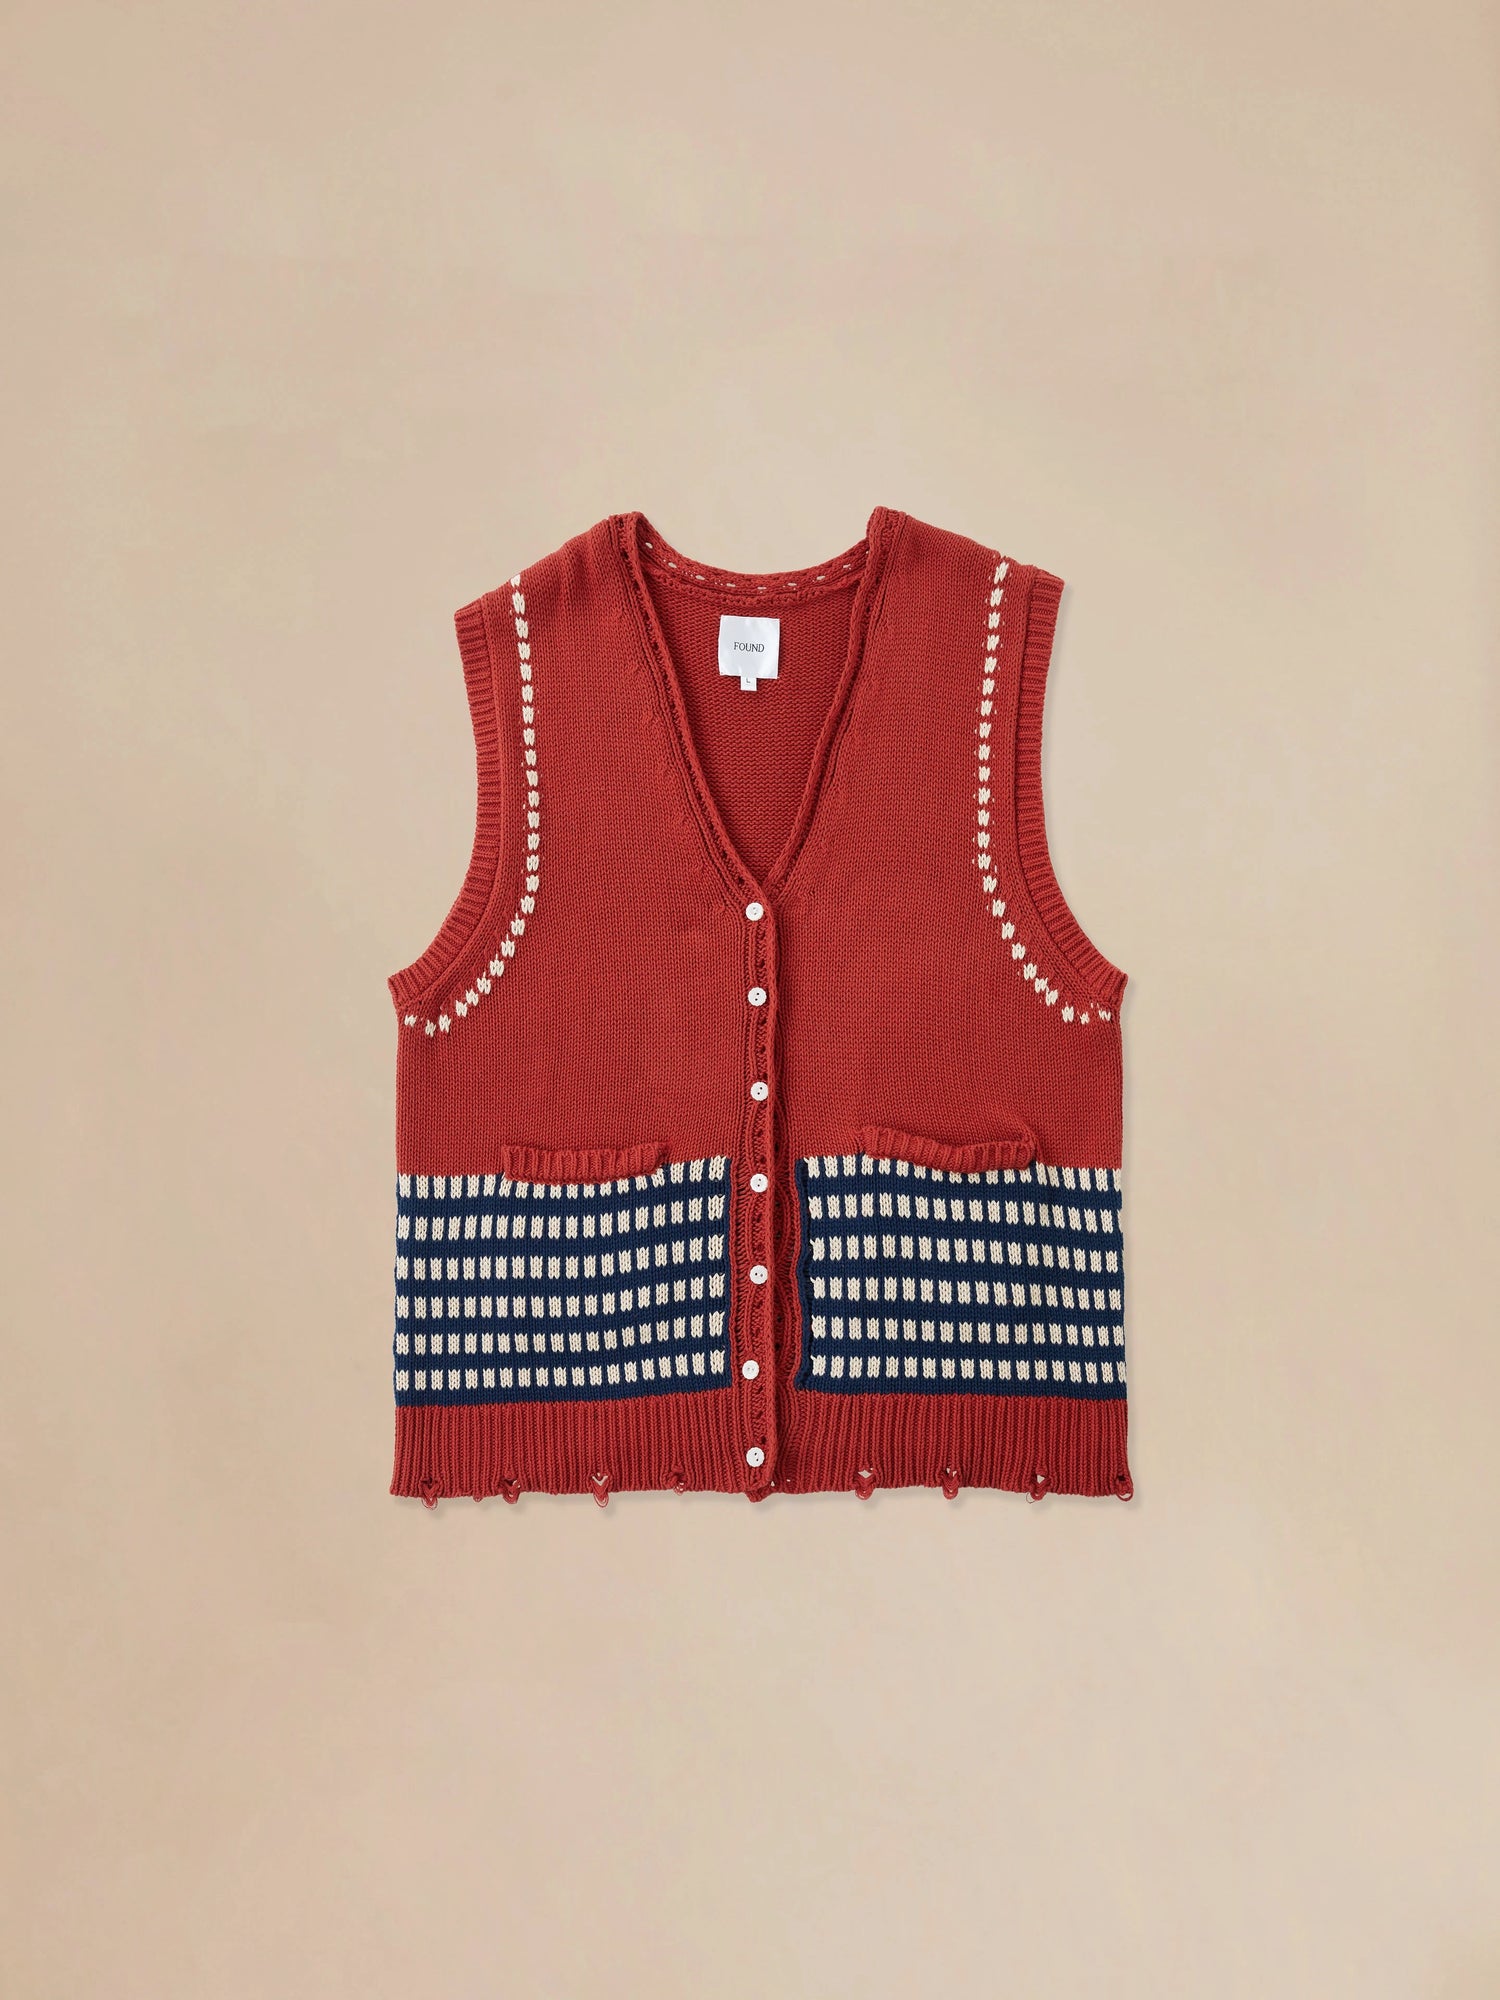 An Found Homestead Check Sweater Knit Vest